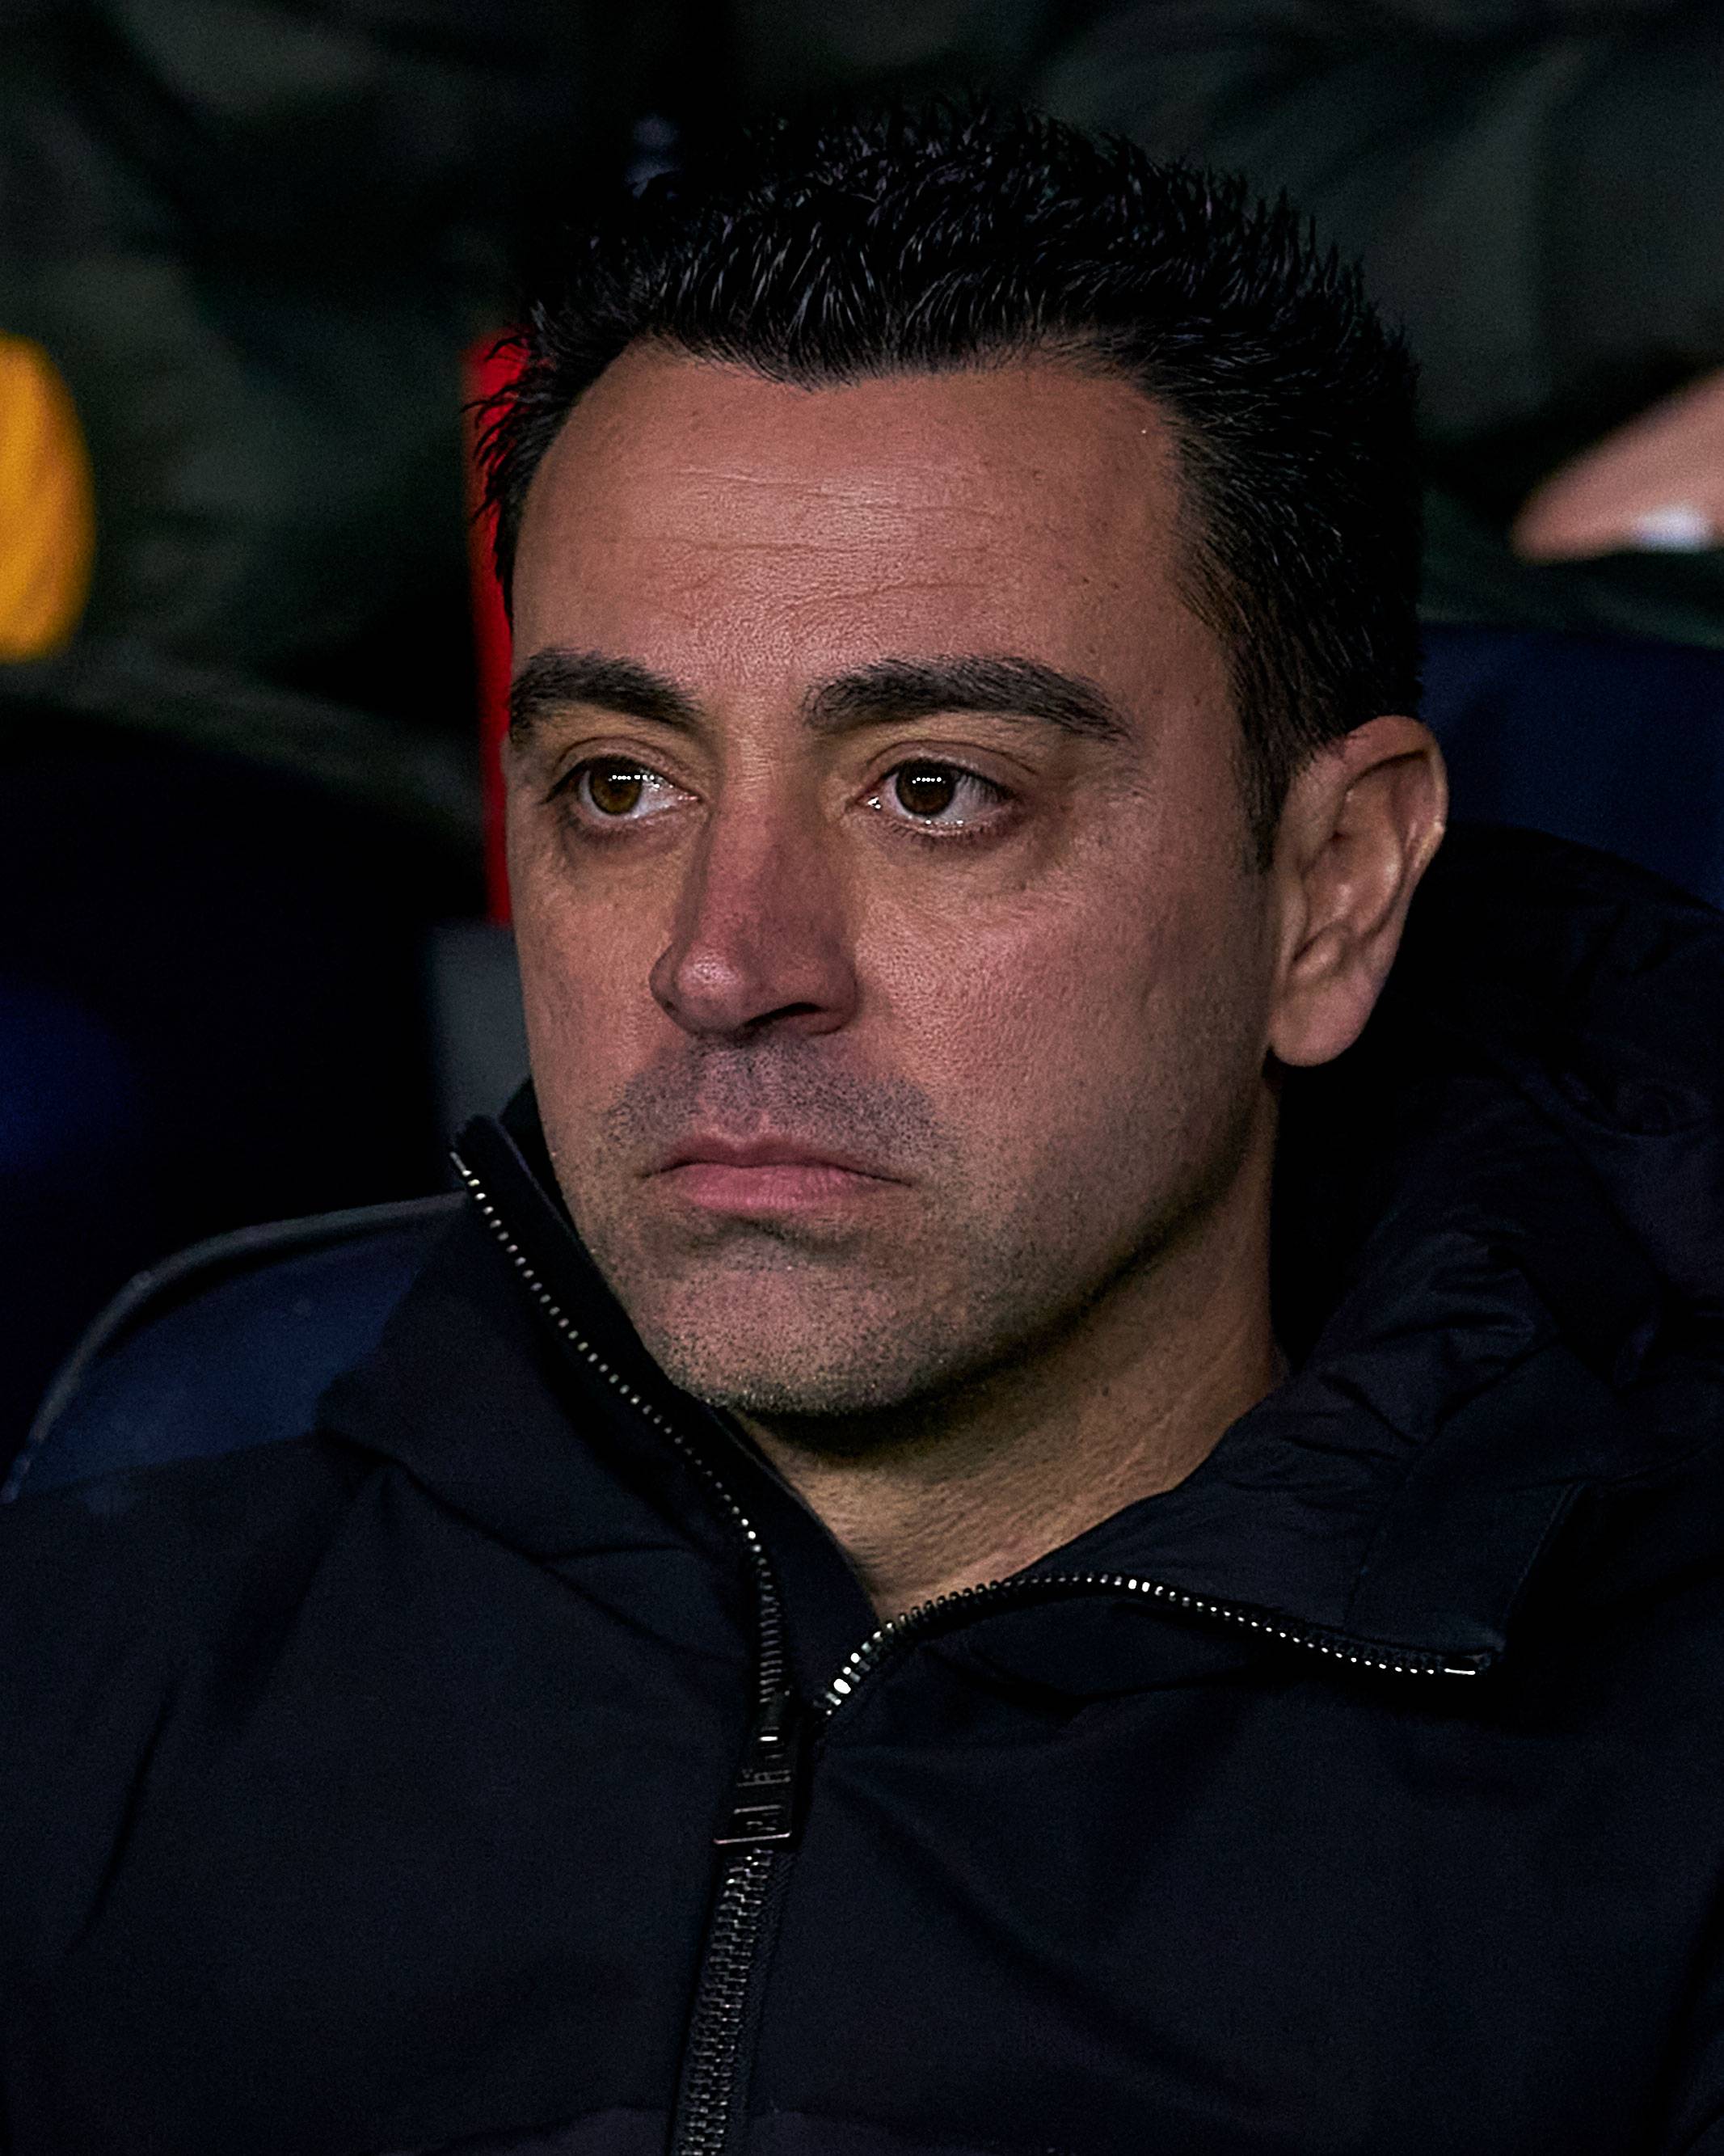 JUST IN: Xavi is suspended for two matches following his red card against Atletico. #fcblive